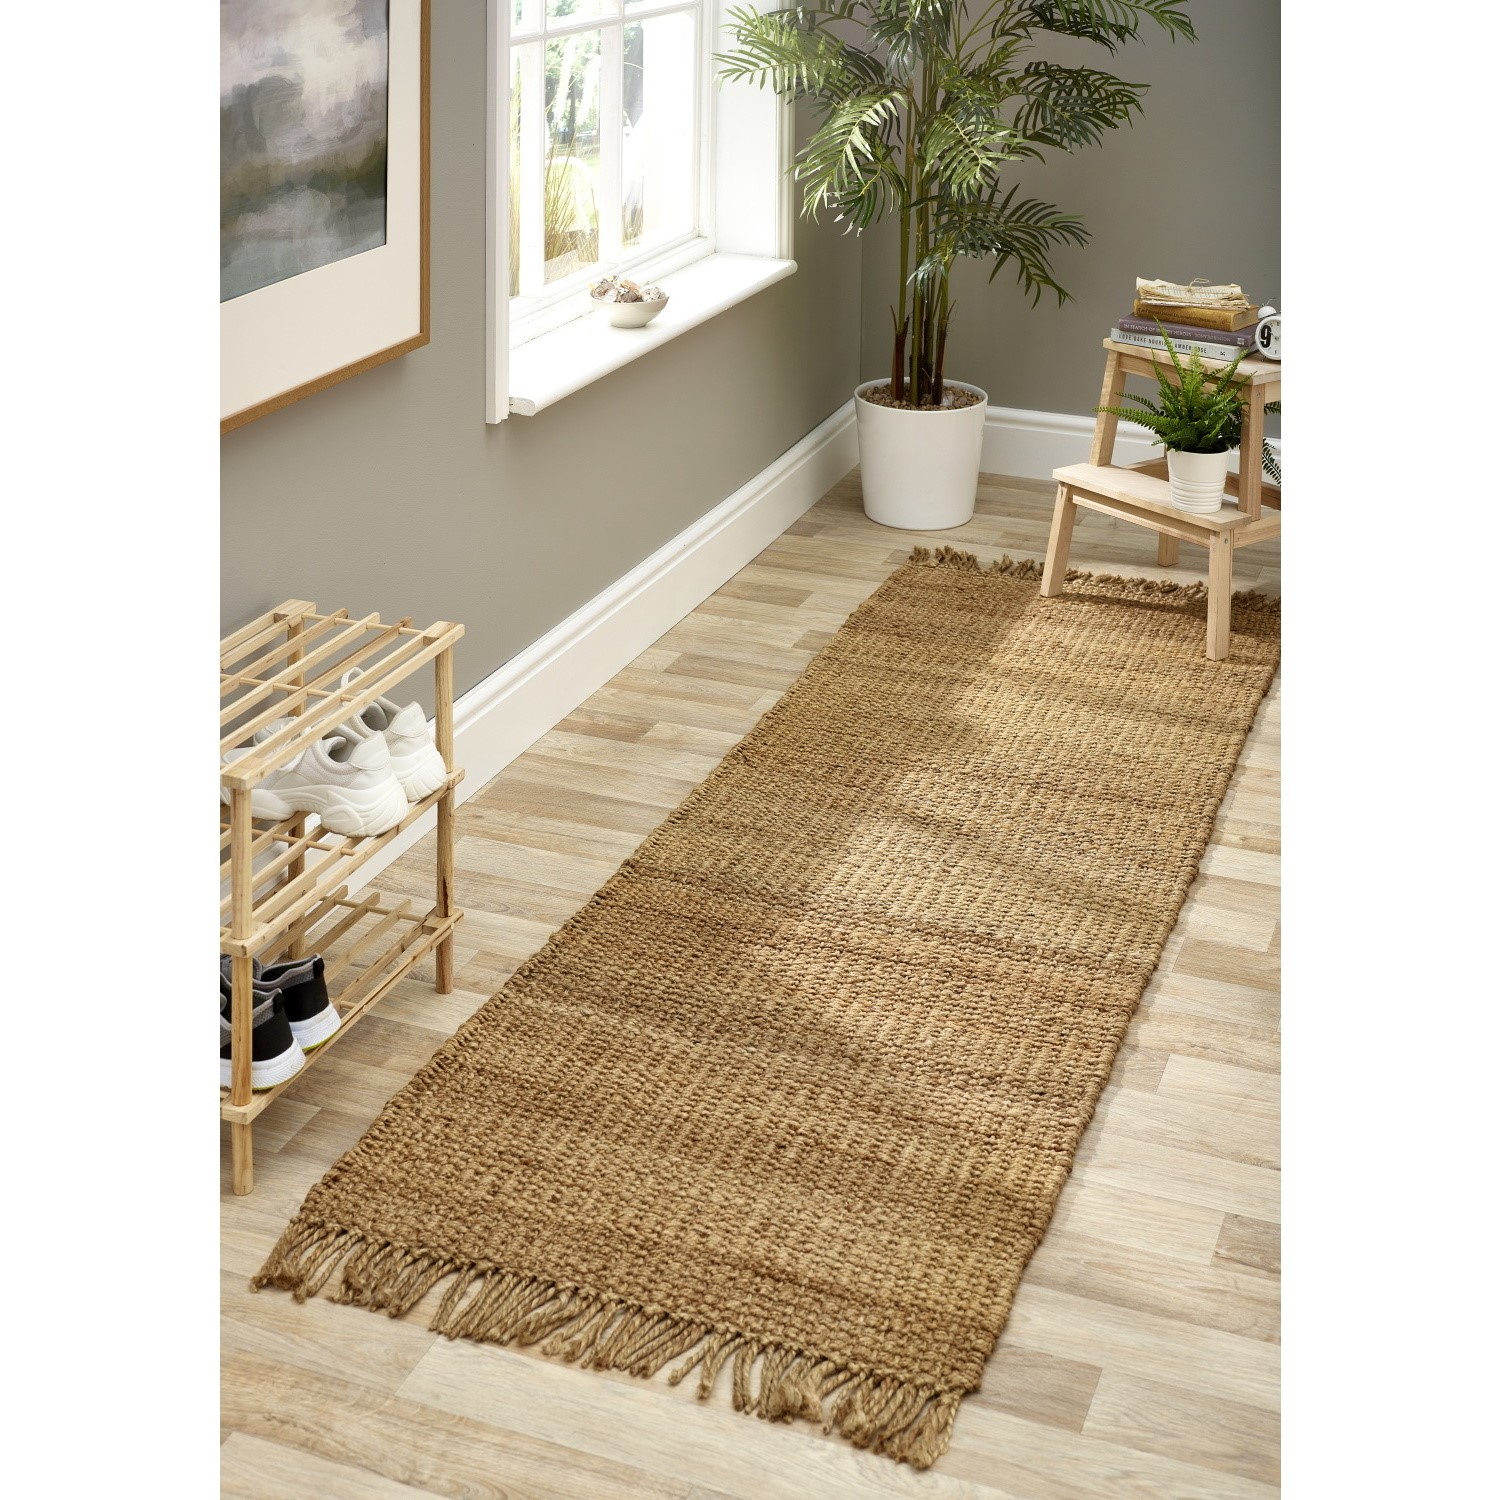 Read more about Jute runner rug with fringed edging 210x67cm ripley